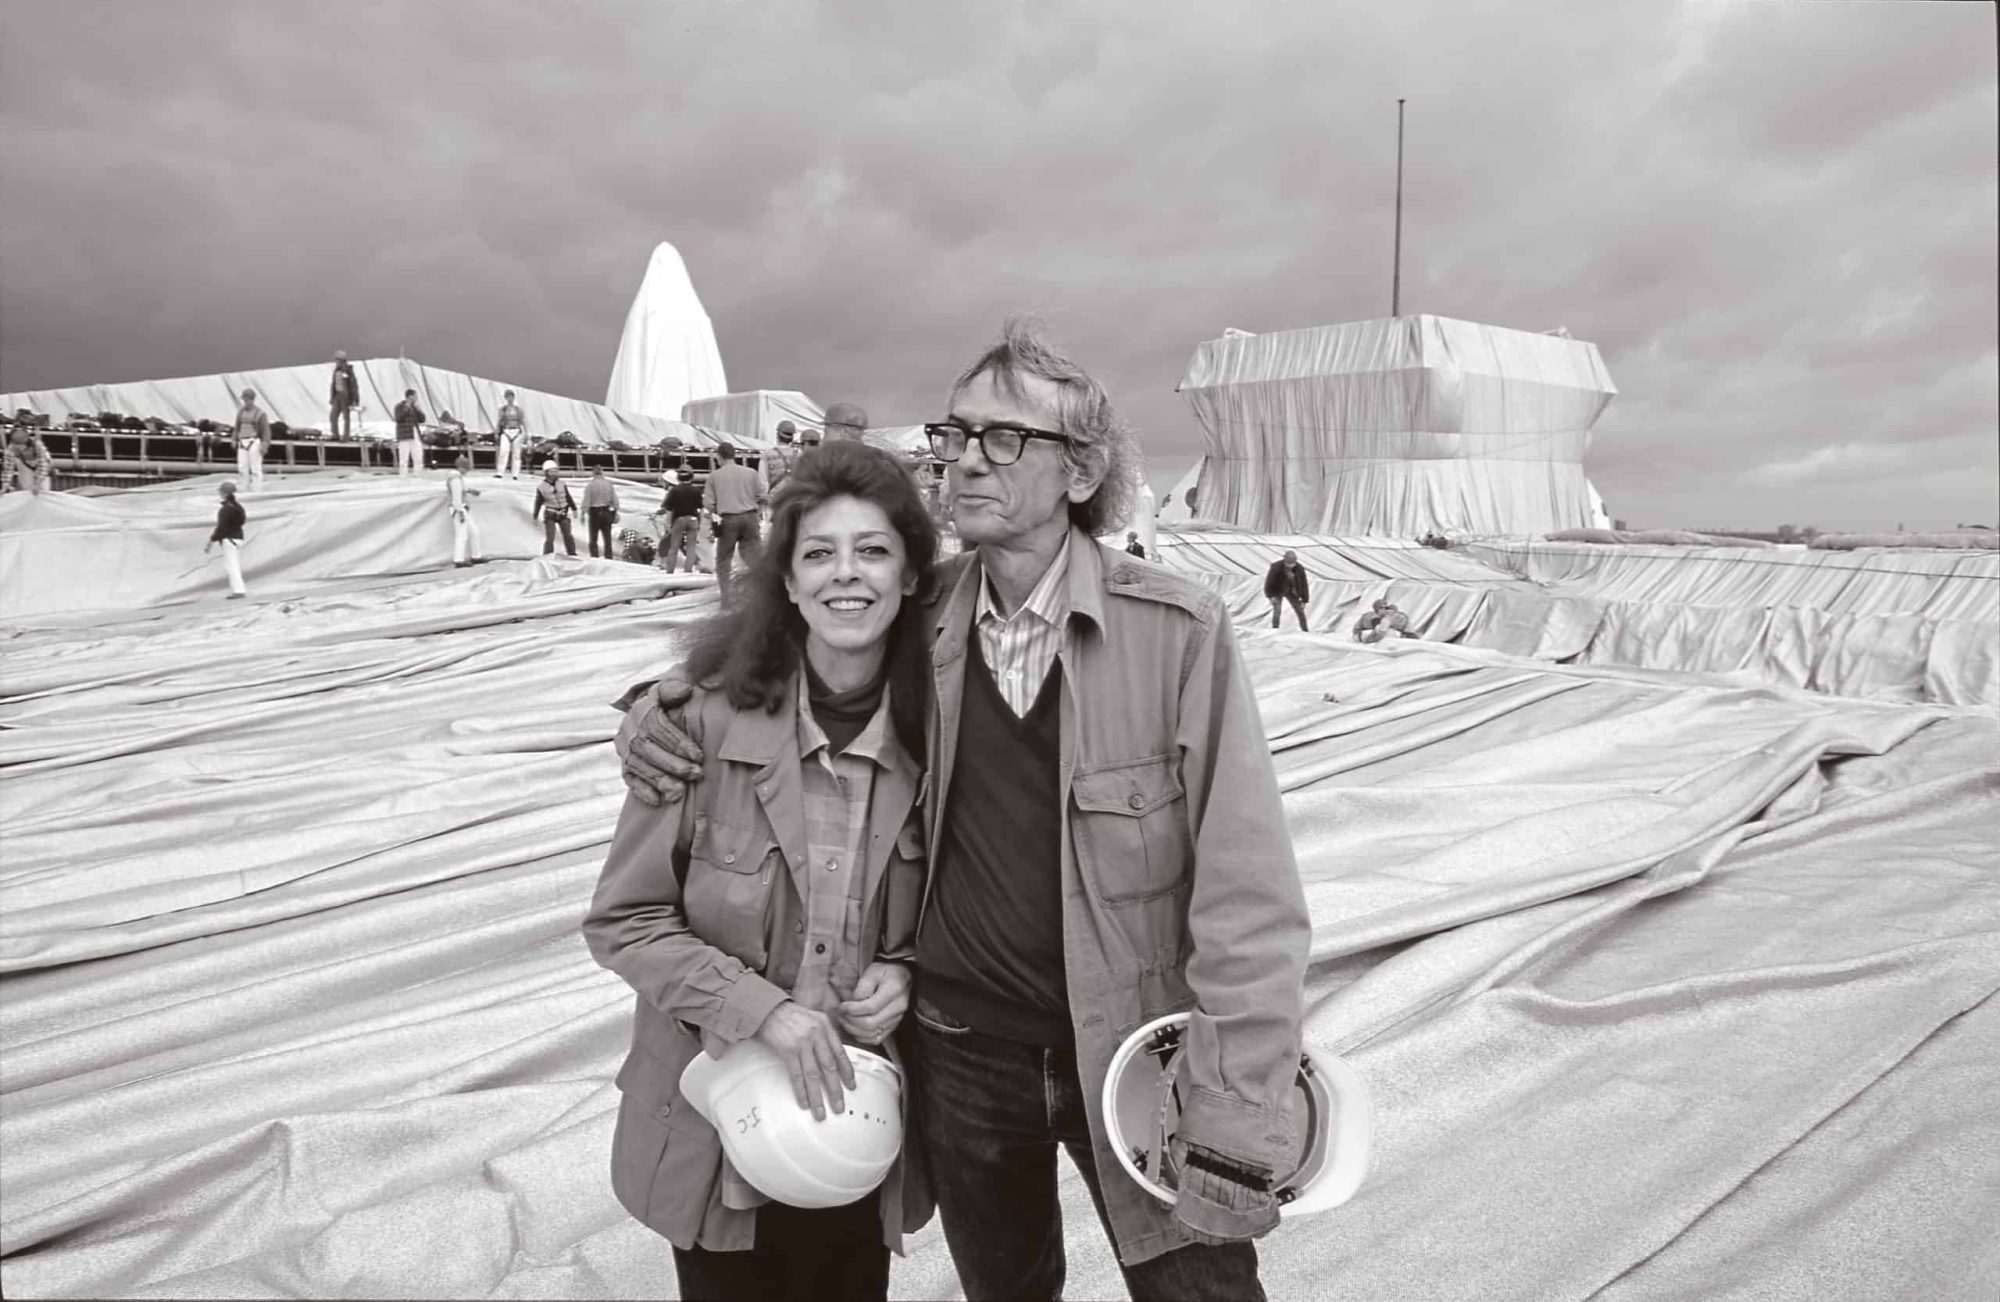 Christo and jean Claude, monumental art, installation, wrapped building